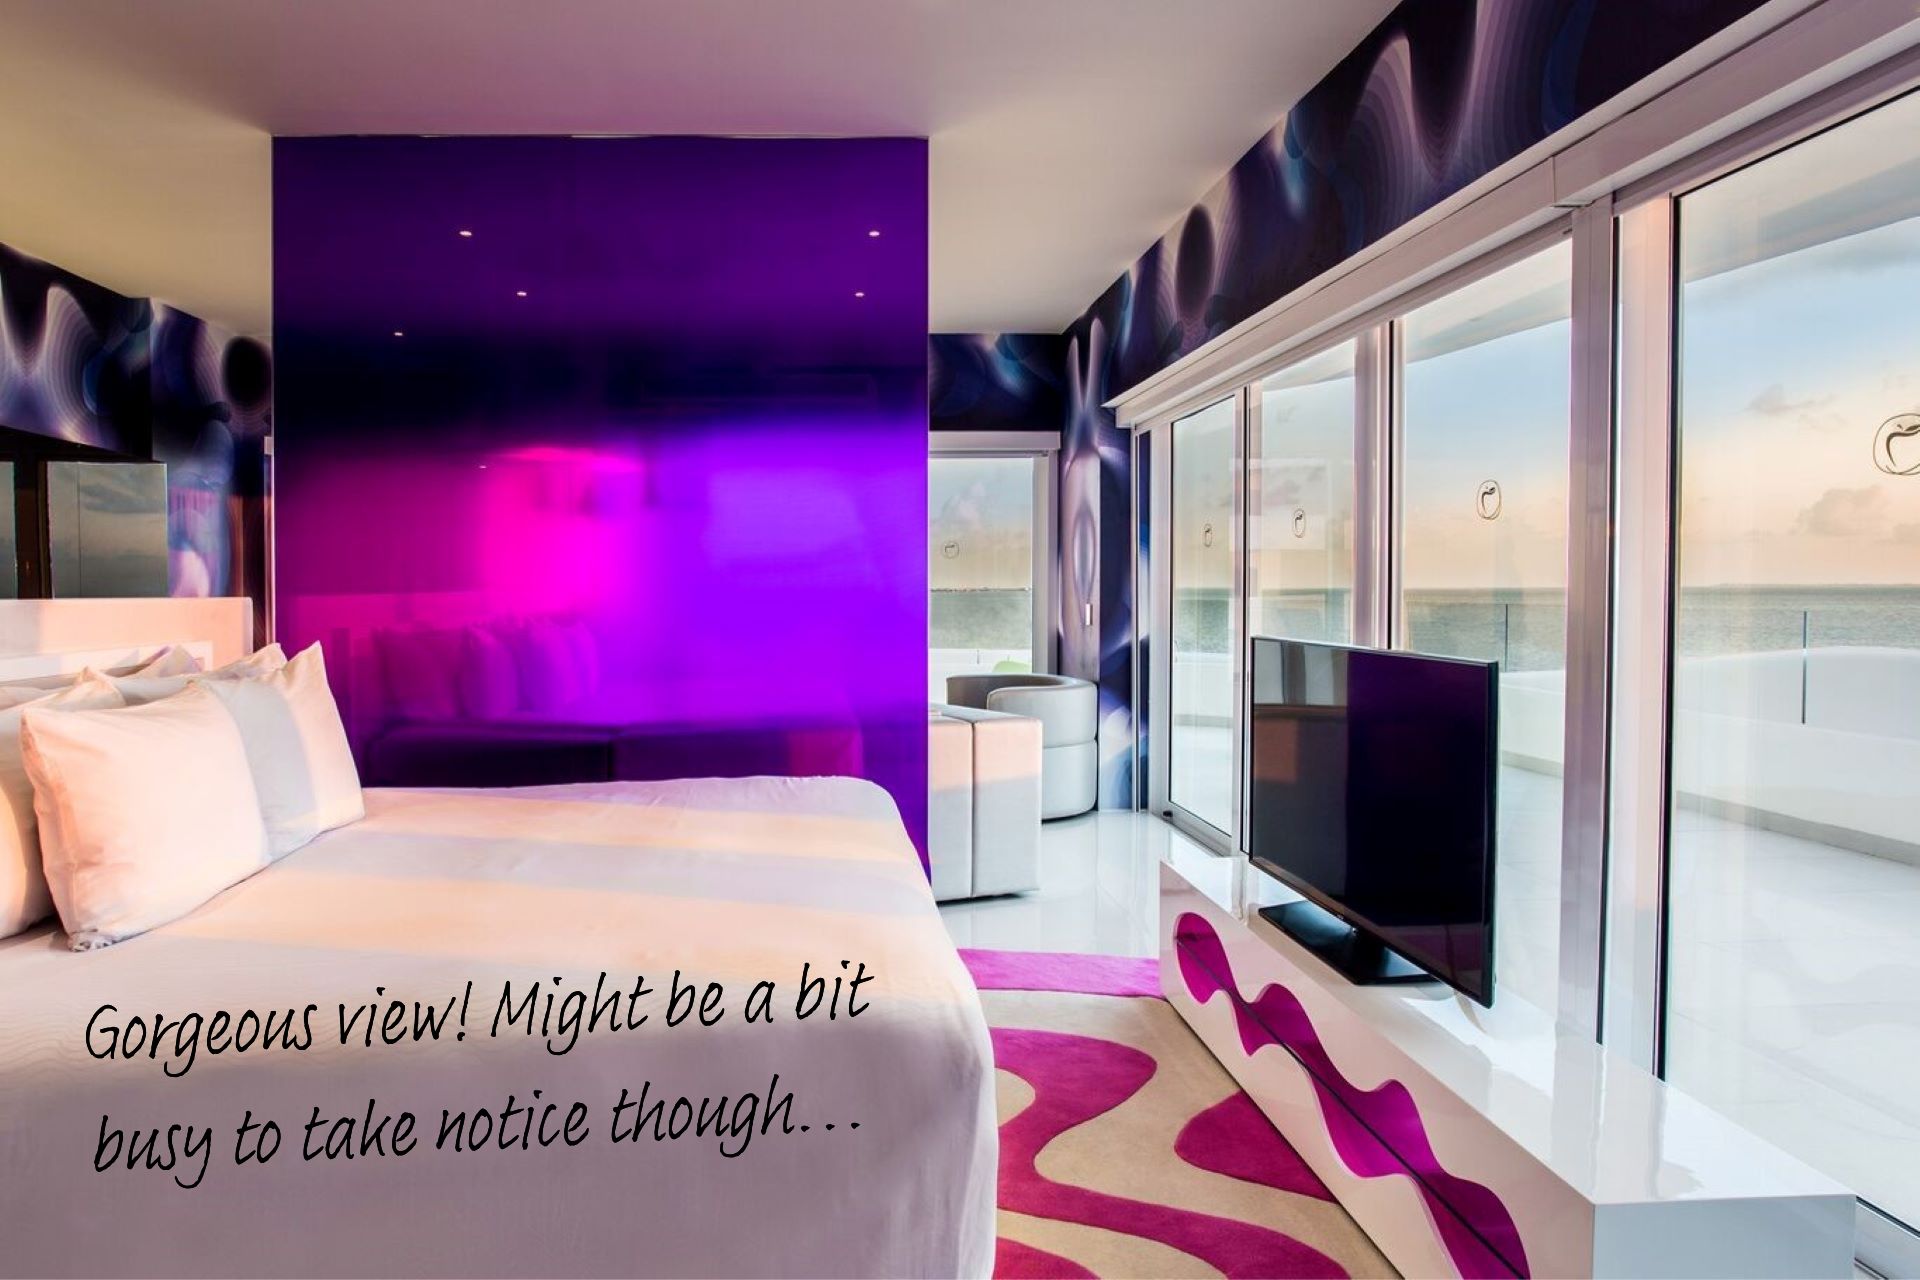 The Ocean Front Master Suite at Temptations Resort Cancun. A large white bed faces a panoramic view of the ocean, with a purple partitioning wall covered in a reflective material next to it.